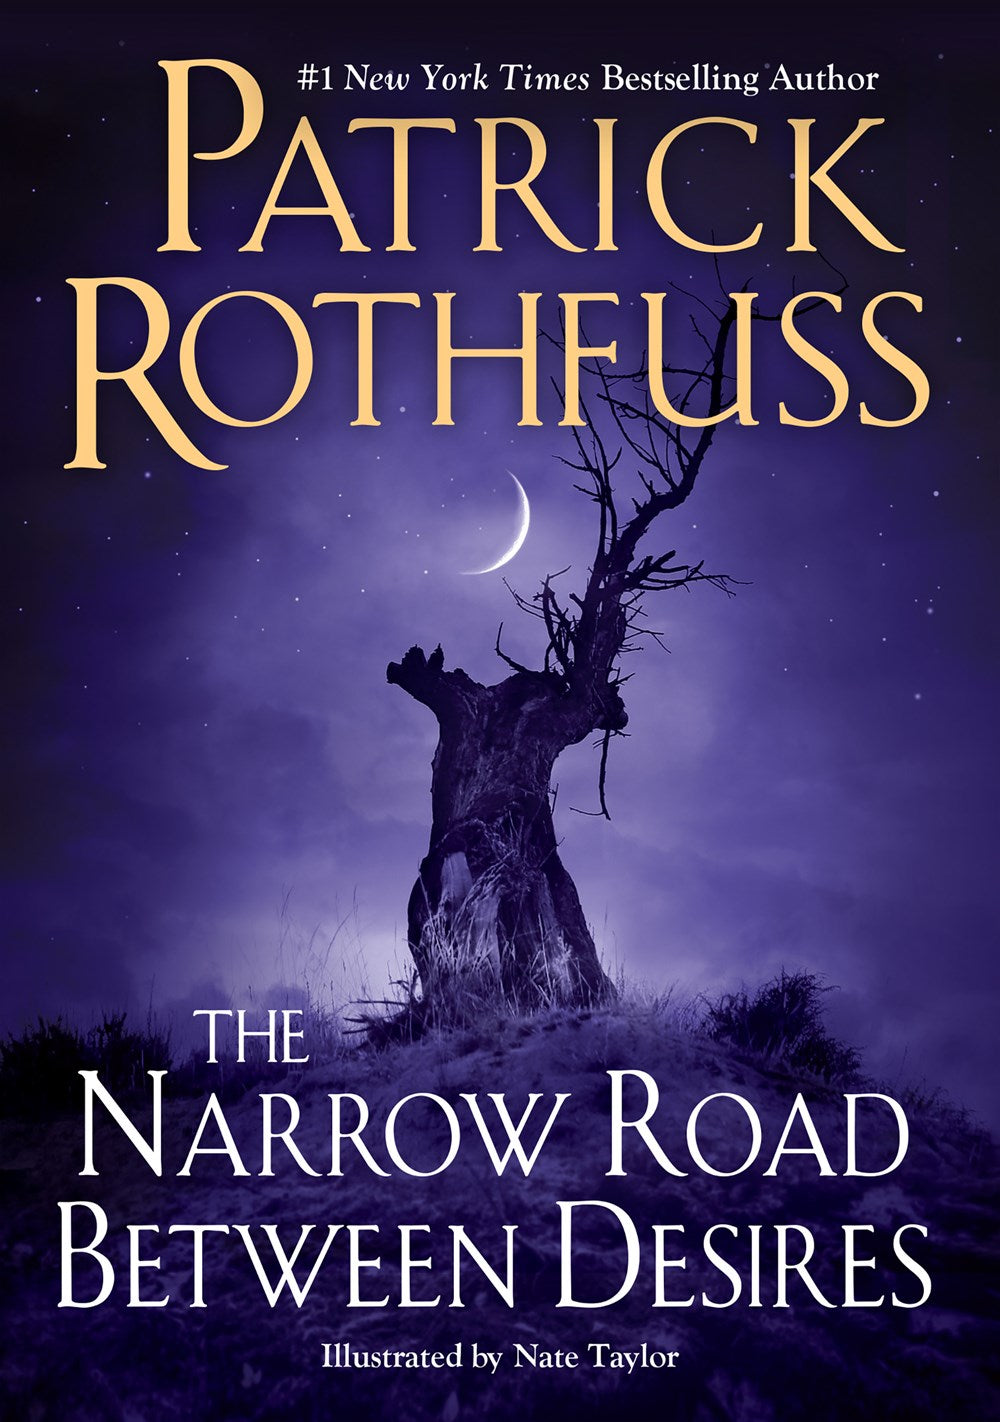 The Narrow Road Between Desires by Patrick Rothfuss (Kingkiller Chronicle, Standalone) (11/14/23)